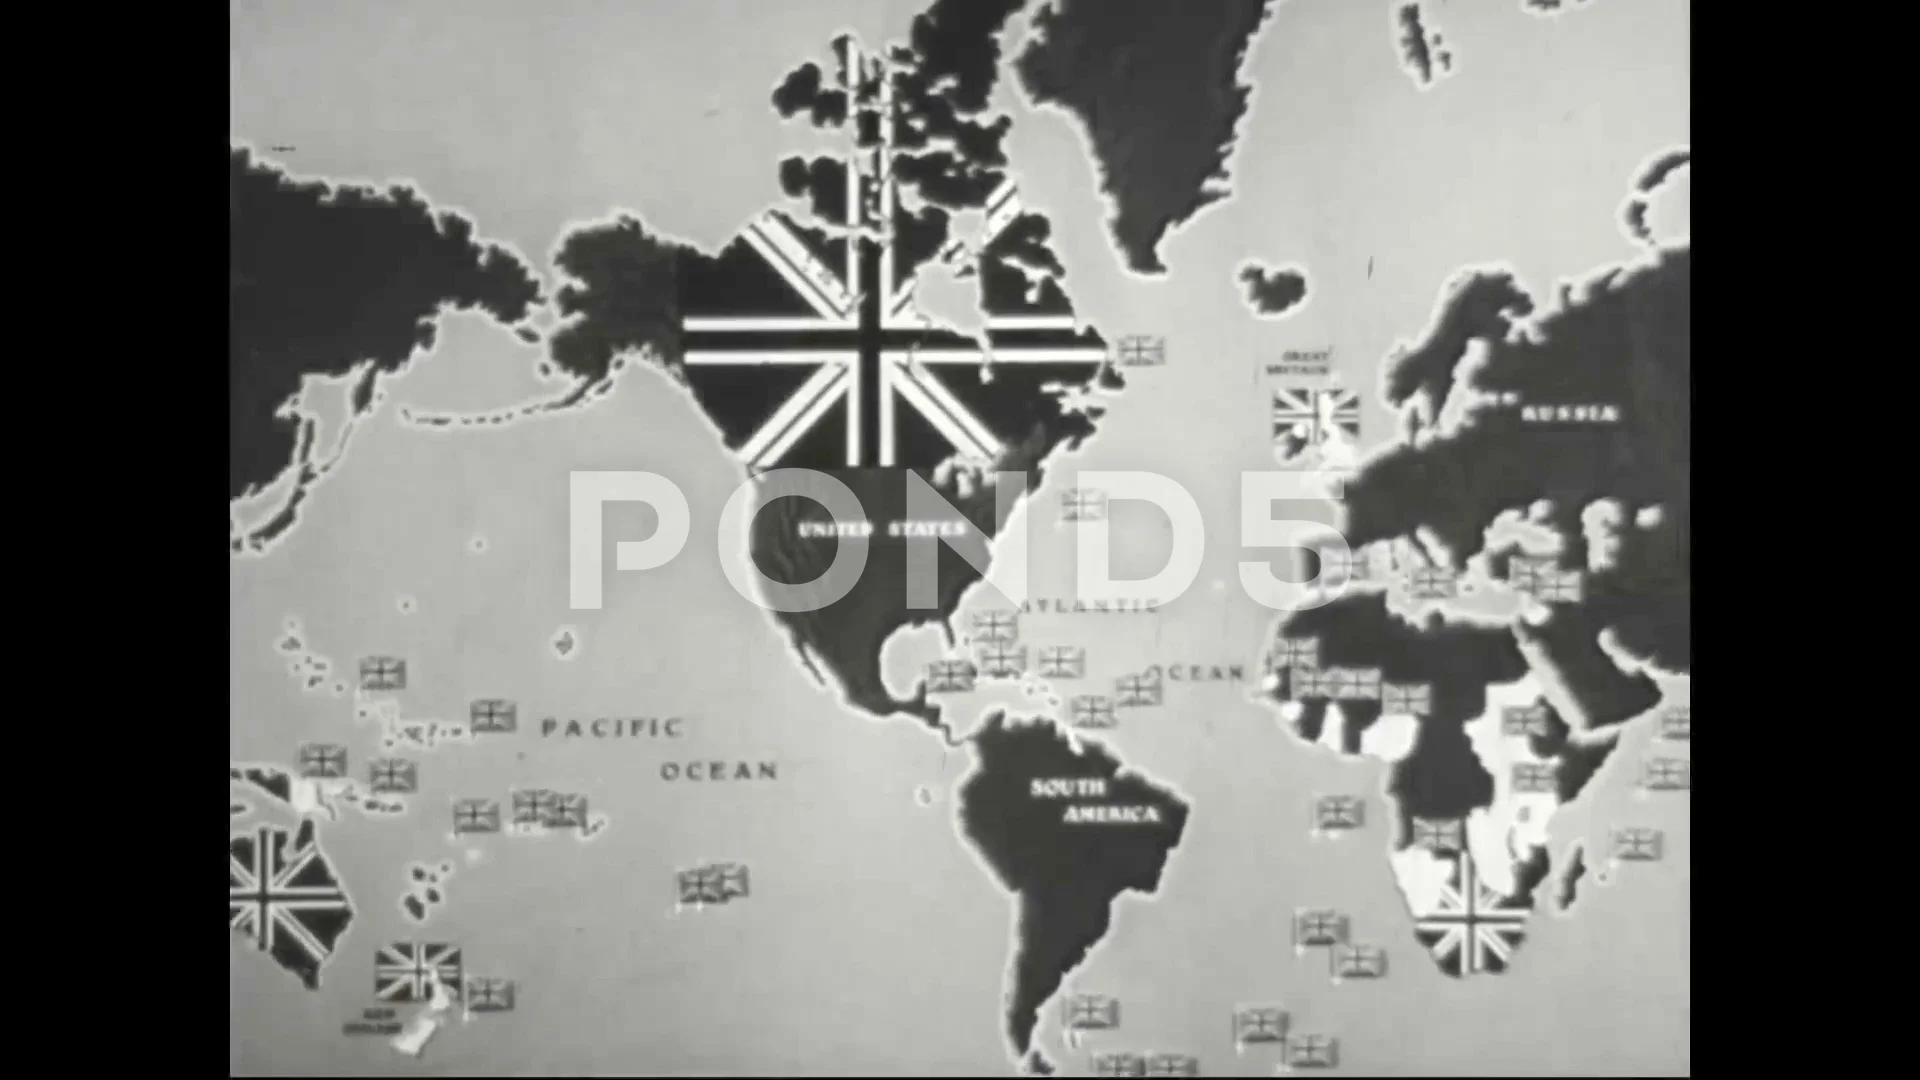 Map of the British empire at its greatest extent in 1920 Stock